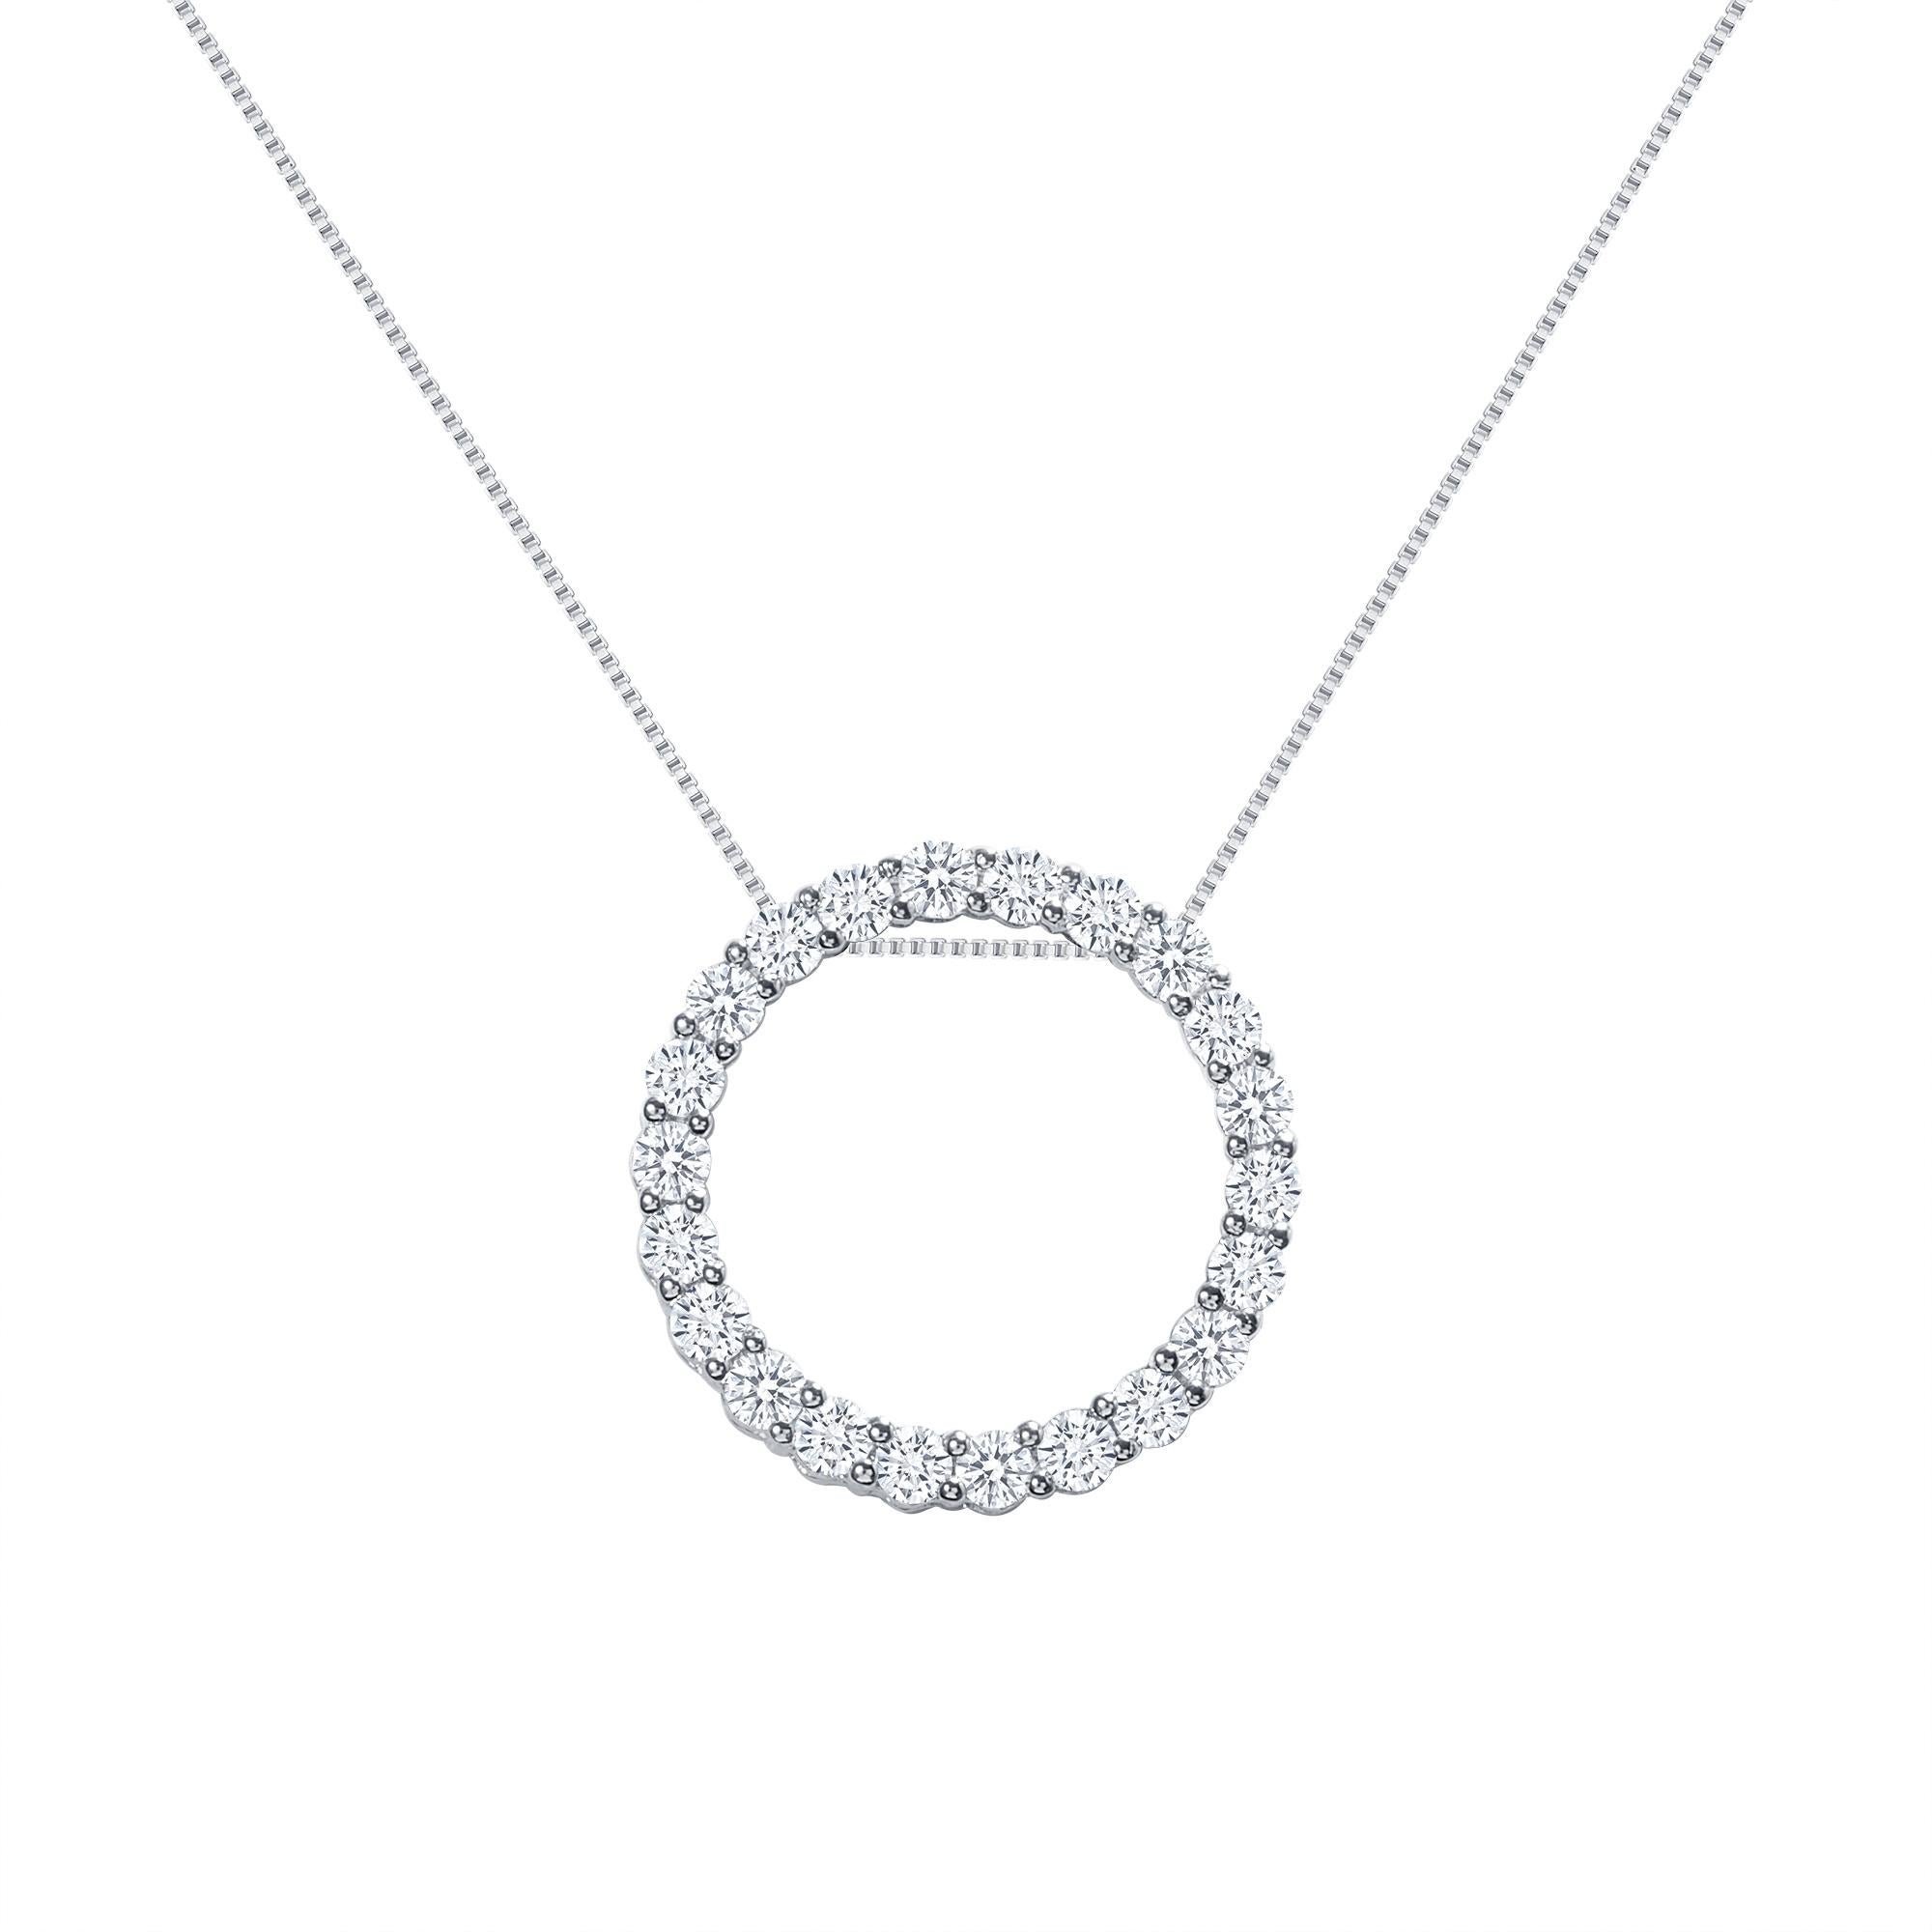 This diamond circle pendant provides a glowing chic look.
Metal: 14k Gold
Diamond Total Carats: 3 carat
Diamond Cut: Round Natural Diamonds (Not Lab Grown)
Diamond Clarity: VS
Diamond Color: F-G
Color: White Gold
Necklace Length: 18 inches